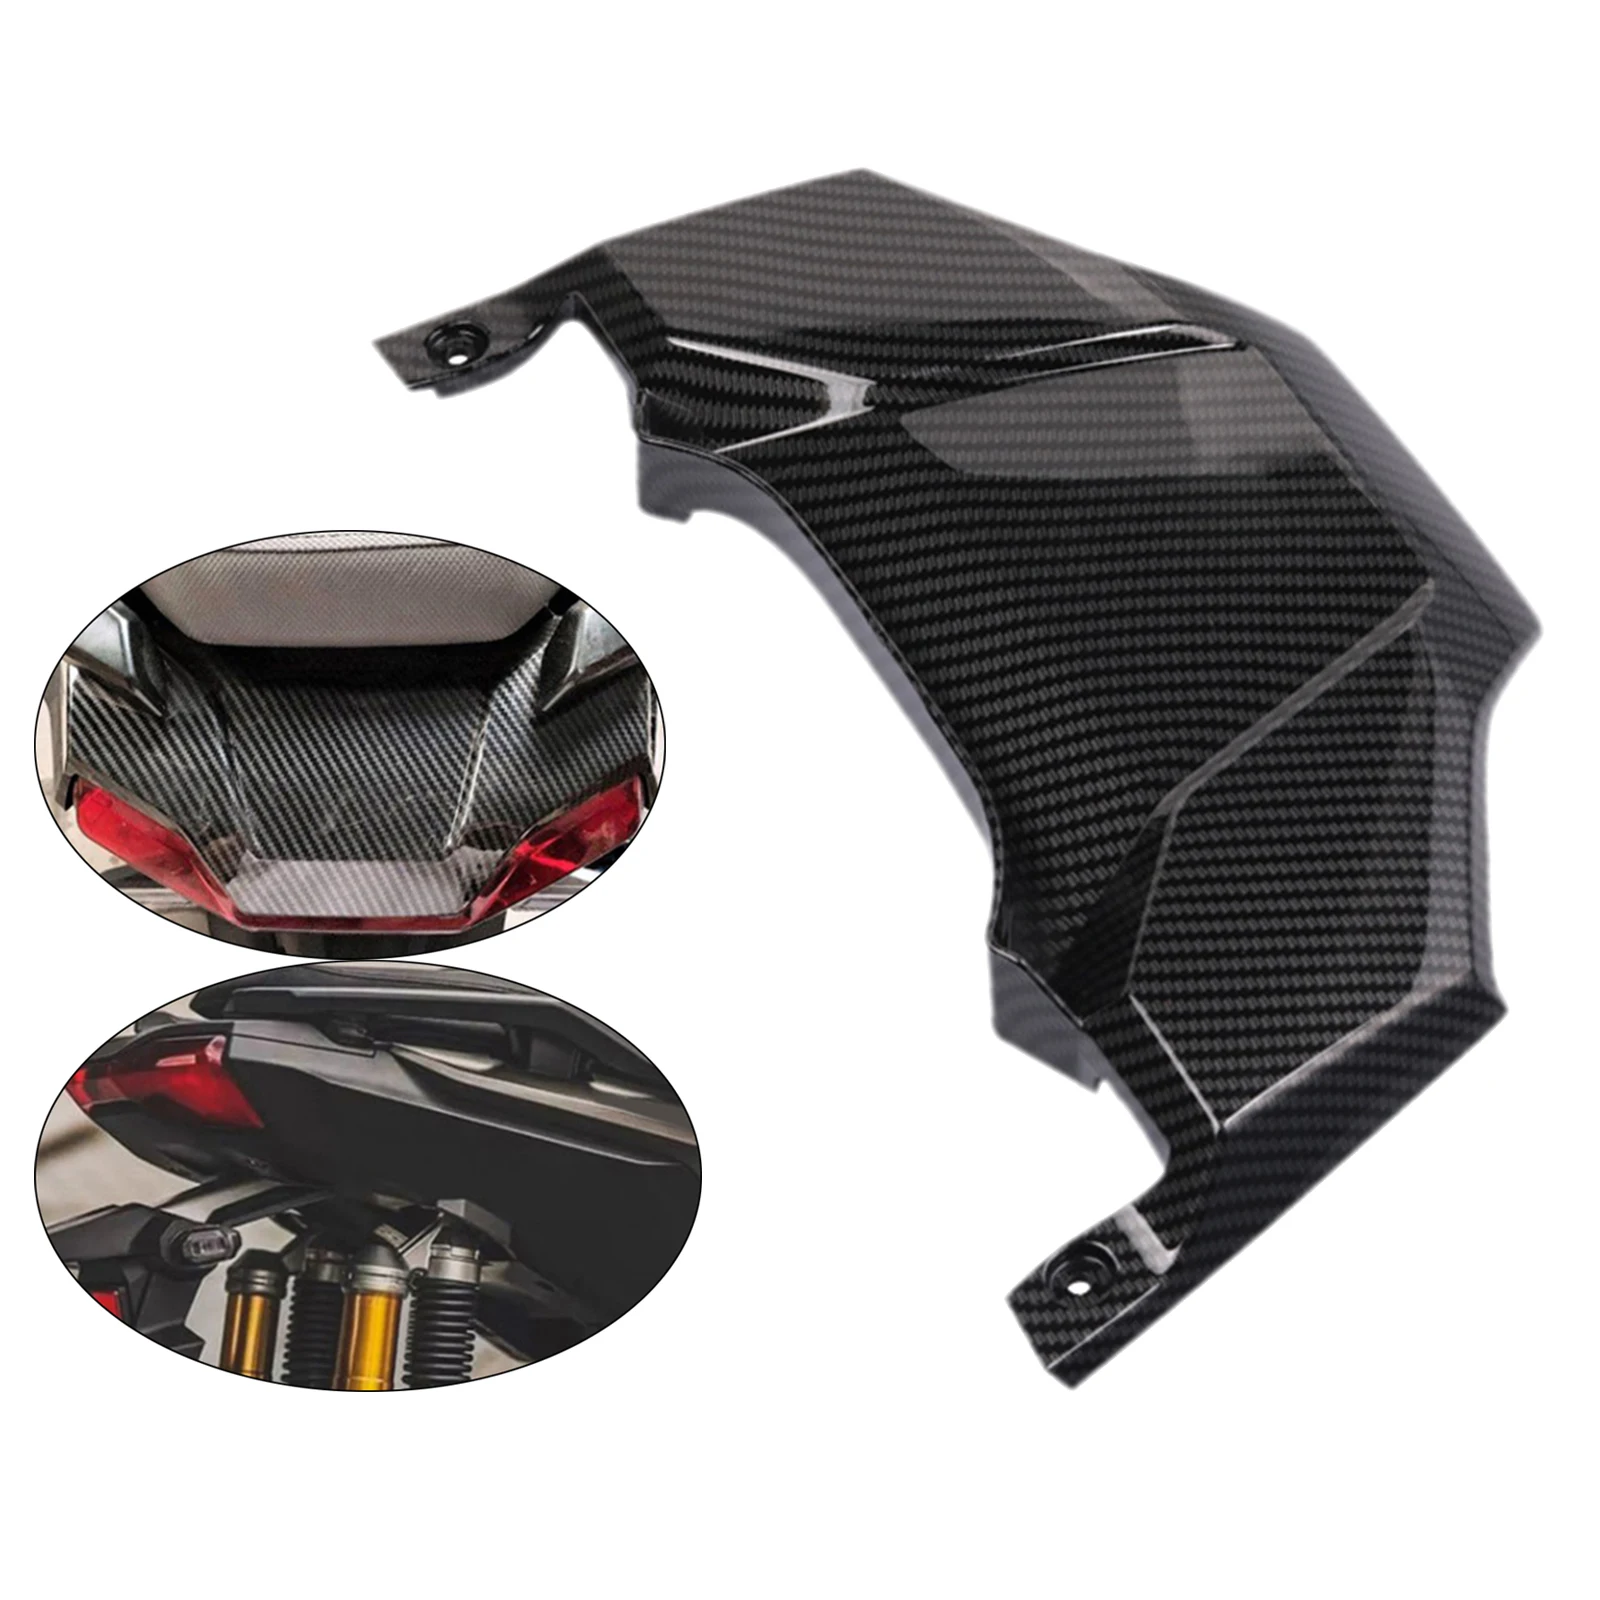 Integrated Tail Light Covers Fairing For Honda ADV150 ADV 150 Accessories